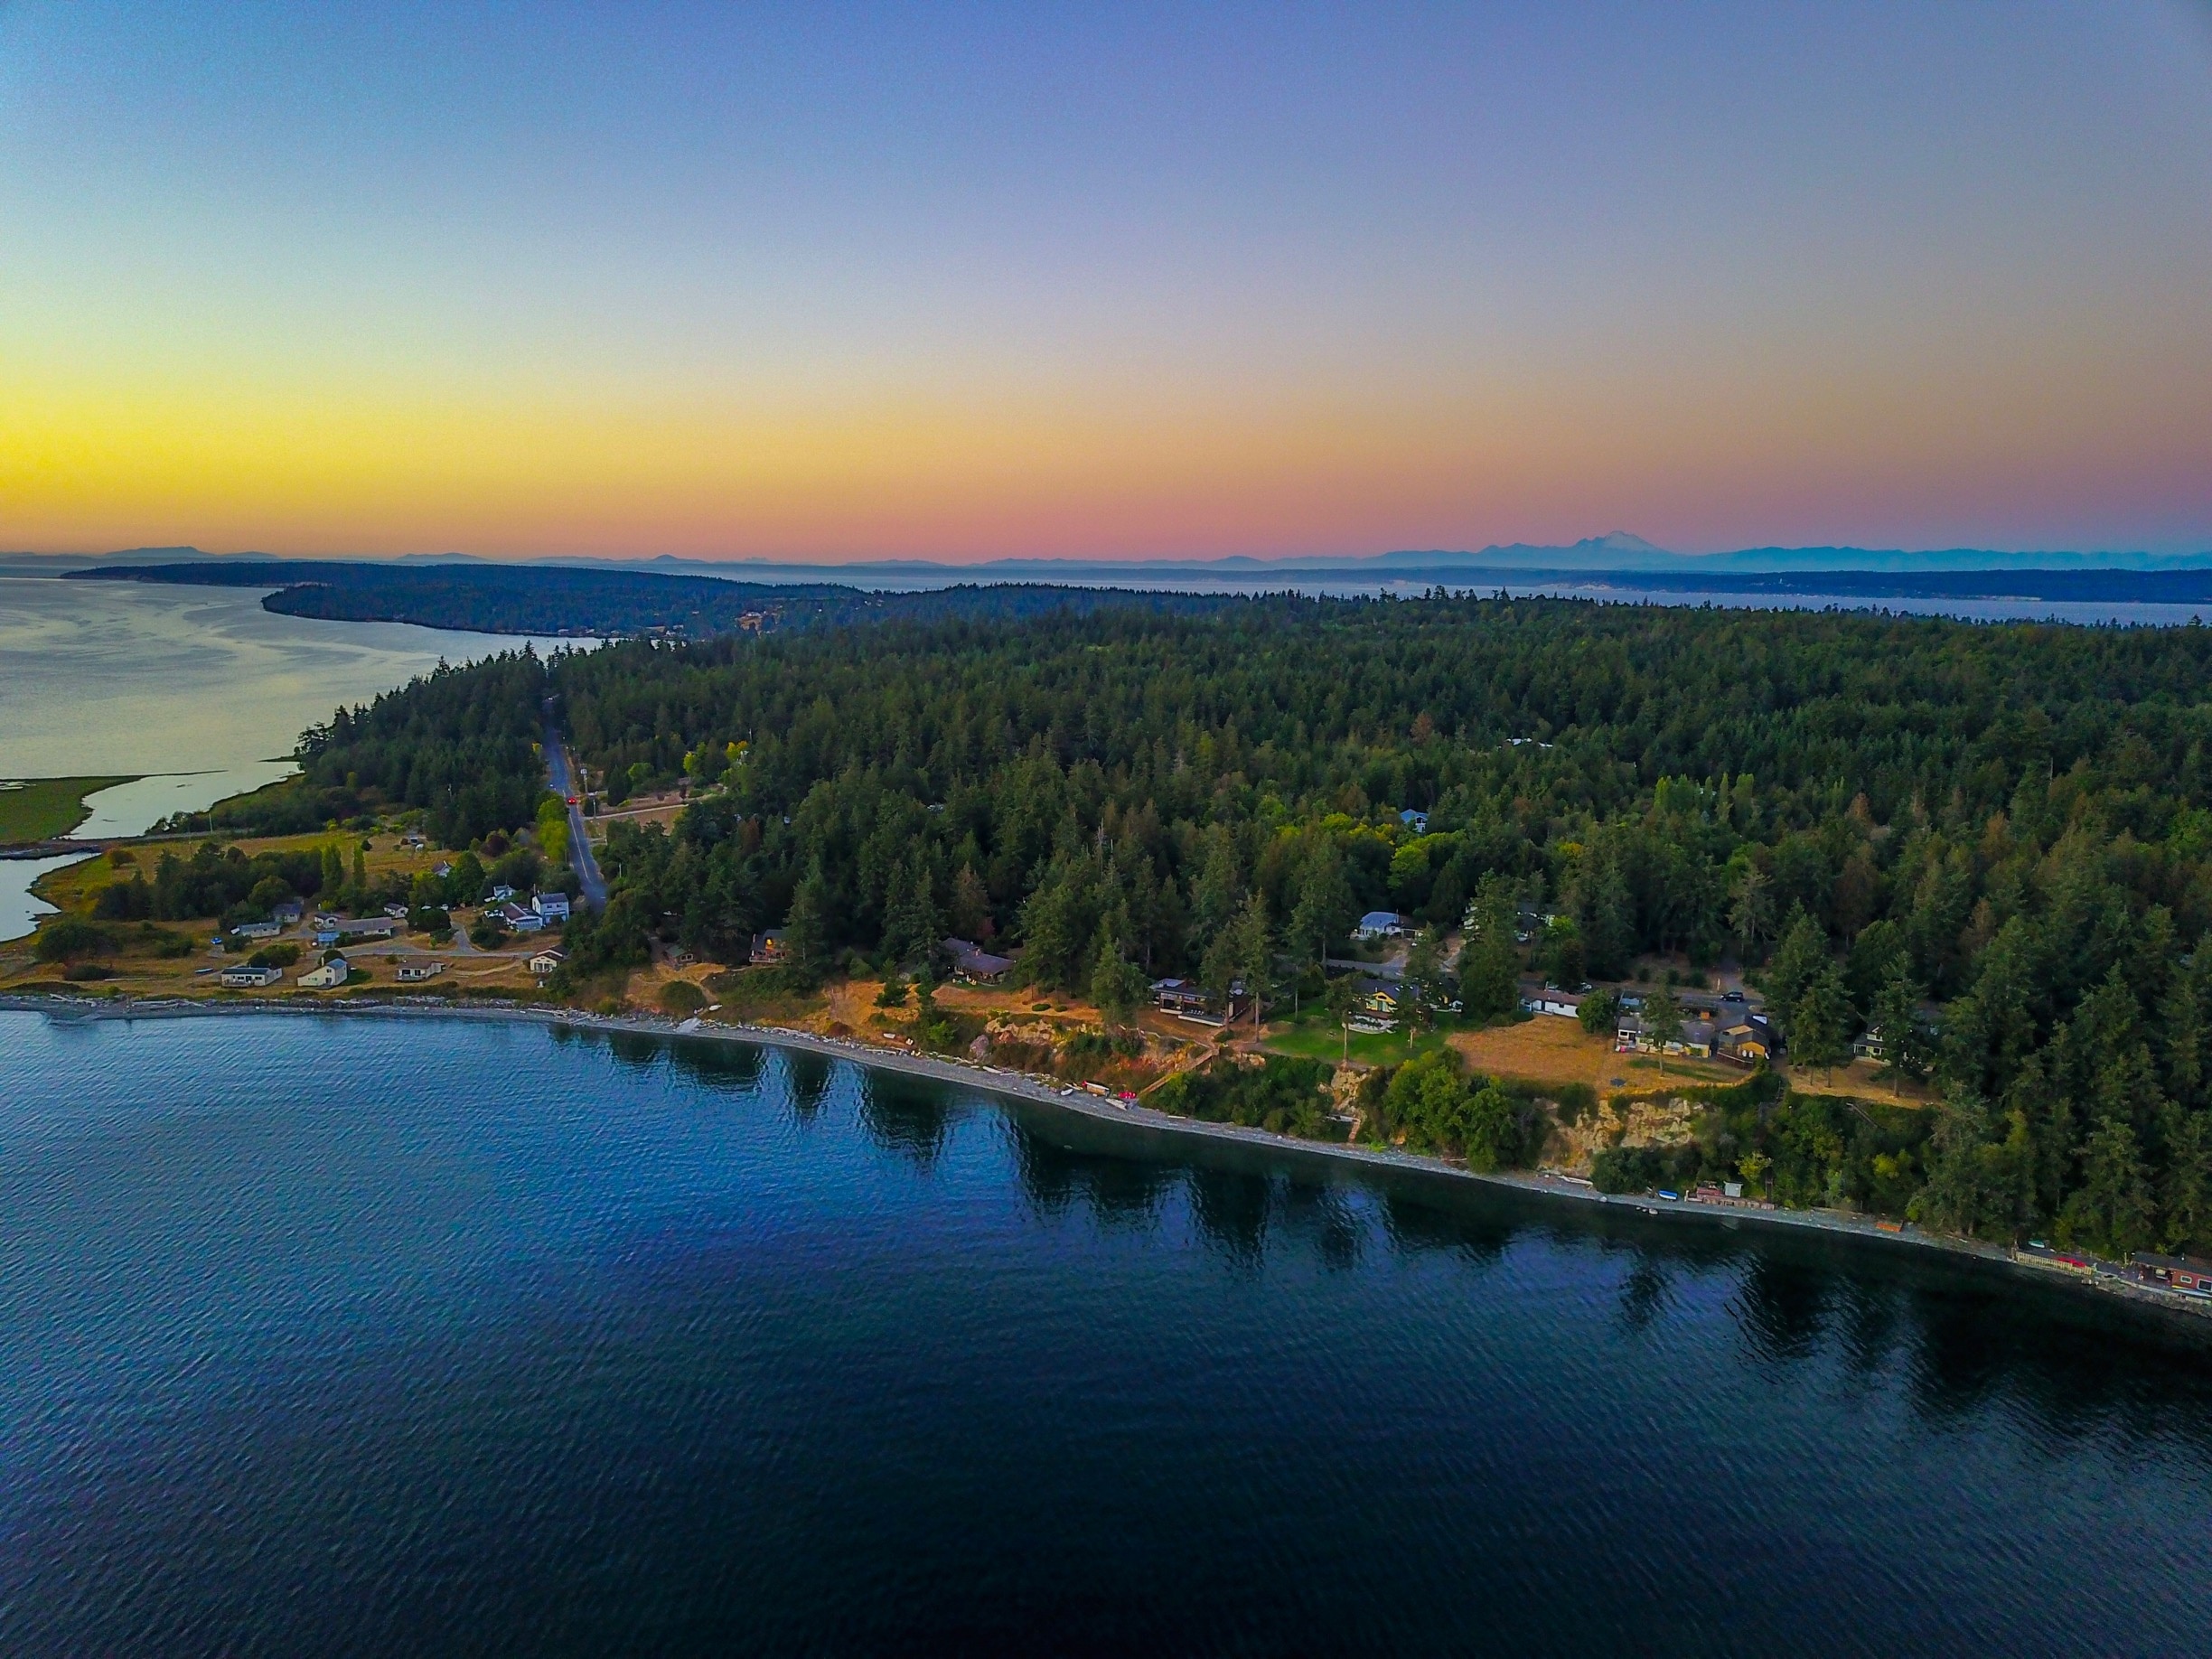 Out of the Olympic peninsula! Look at those colors!! #marrowstone #island #olympicpeninsula #washington #state #pnw #nature #drone #sunset #reflection #ocean 